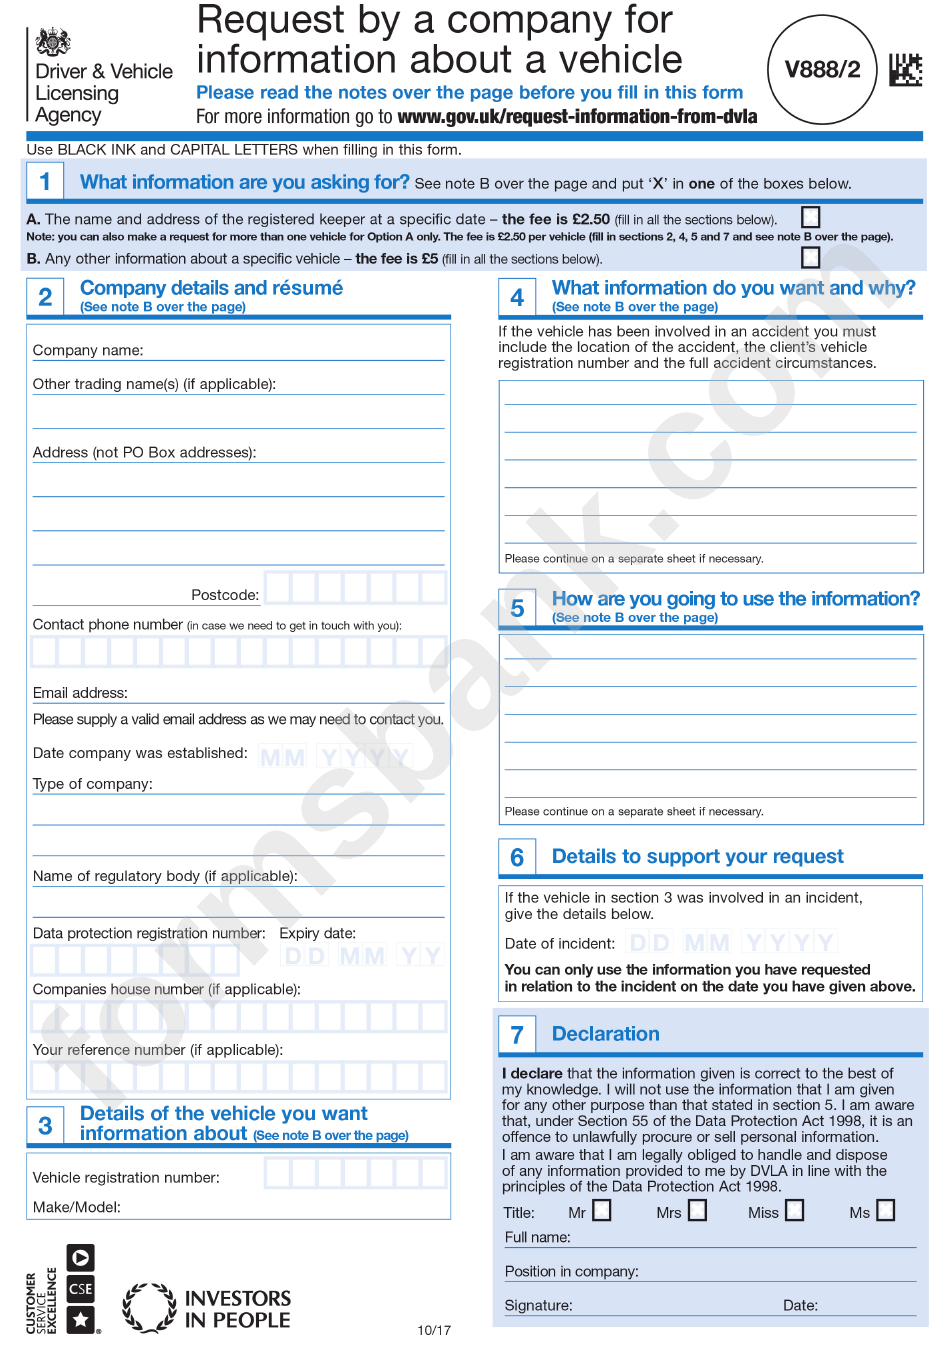 Form V888/2 - Request By A Company For Information About A Vehicle